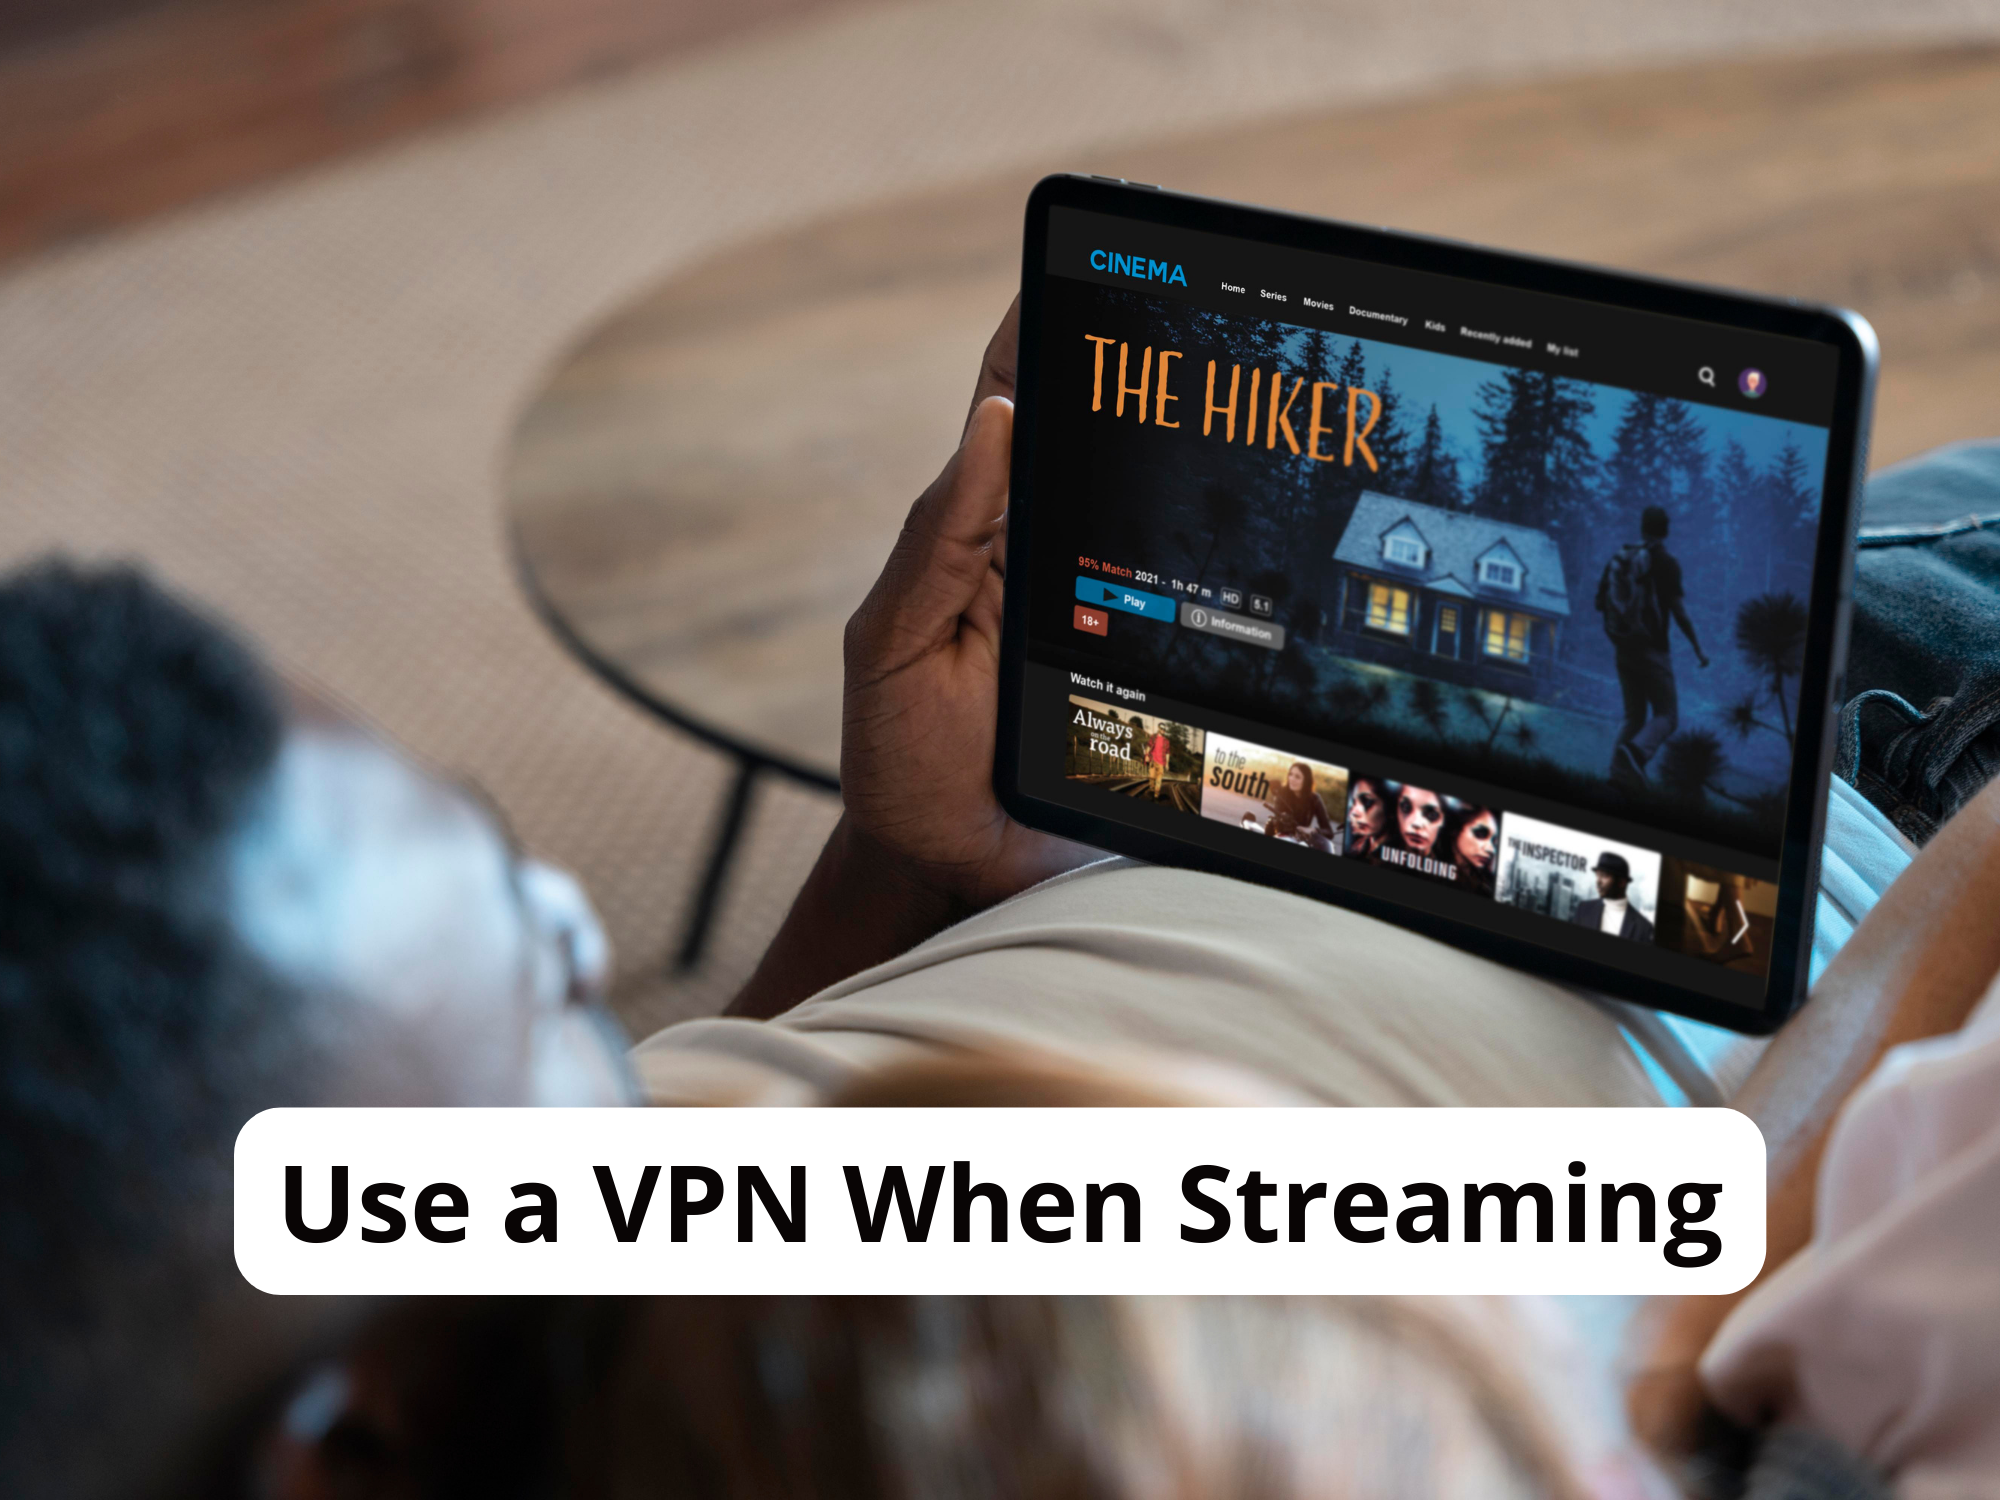 Use a VPN when streaming